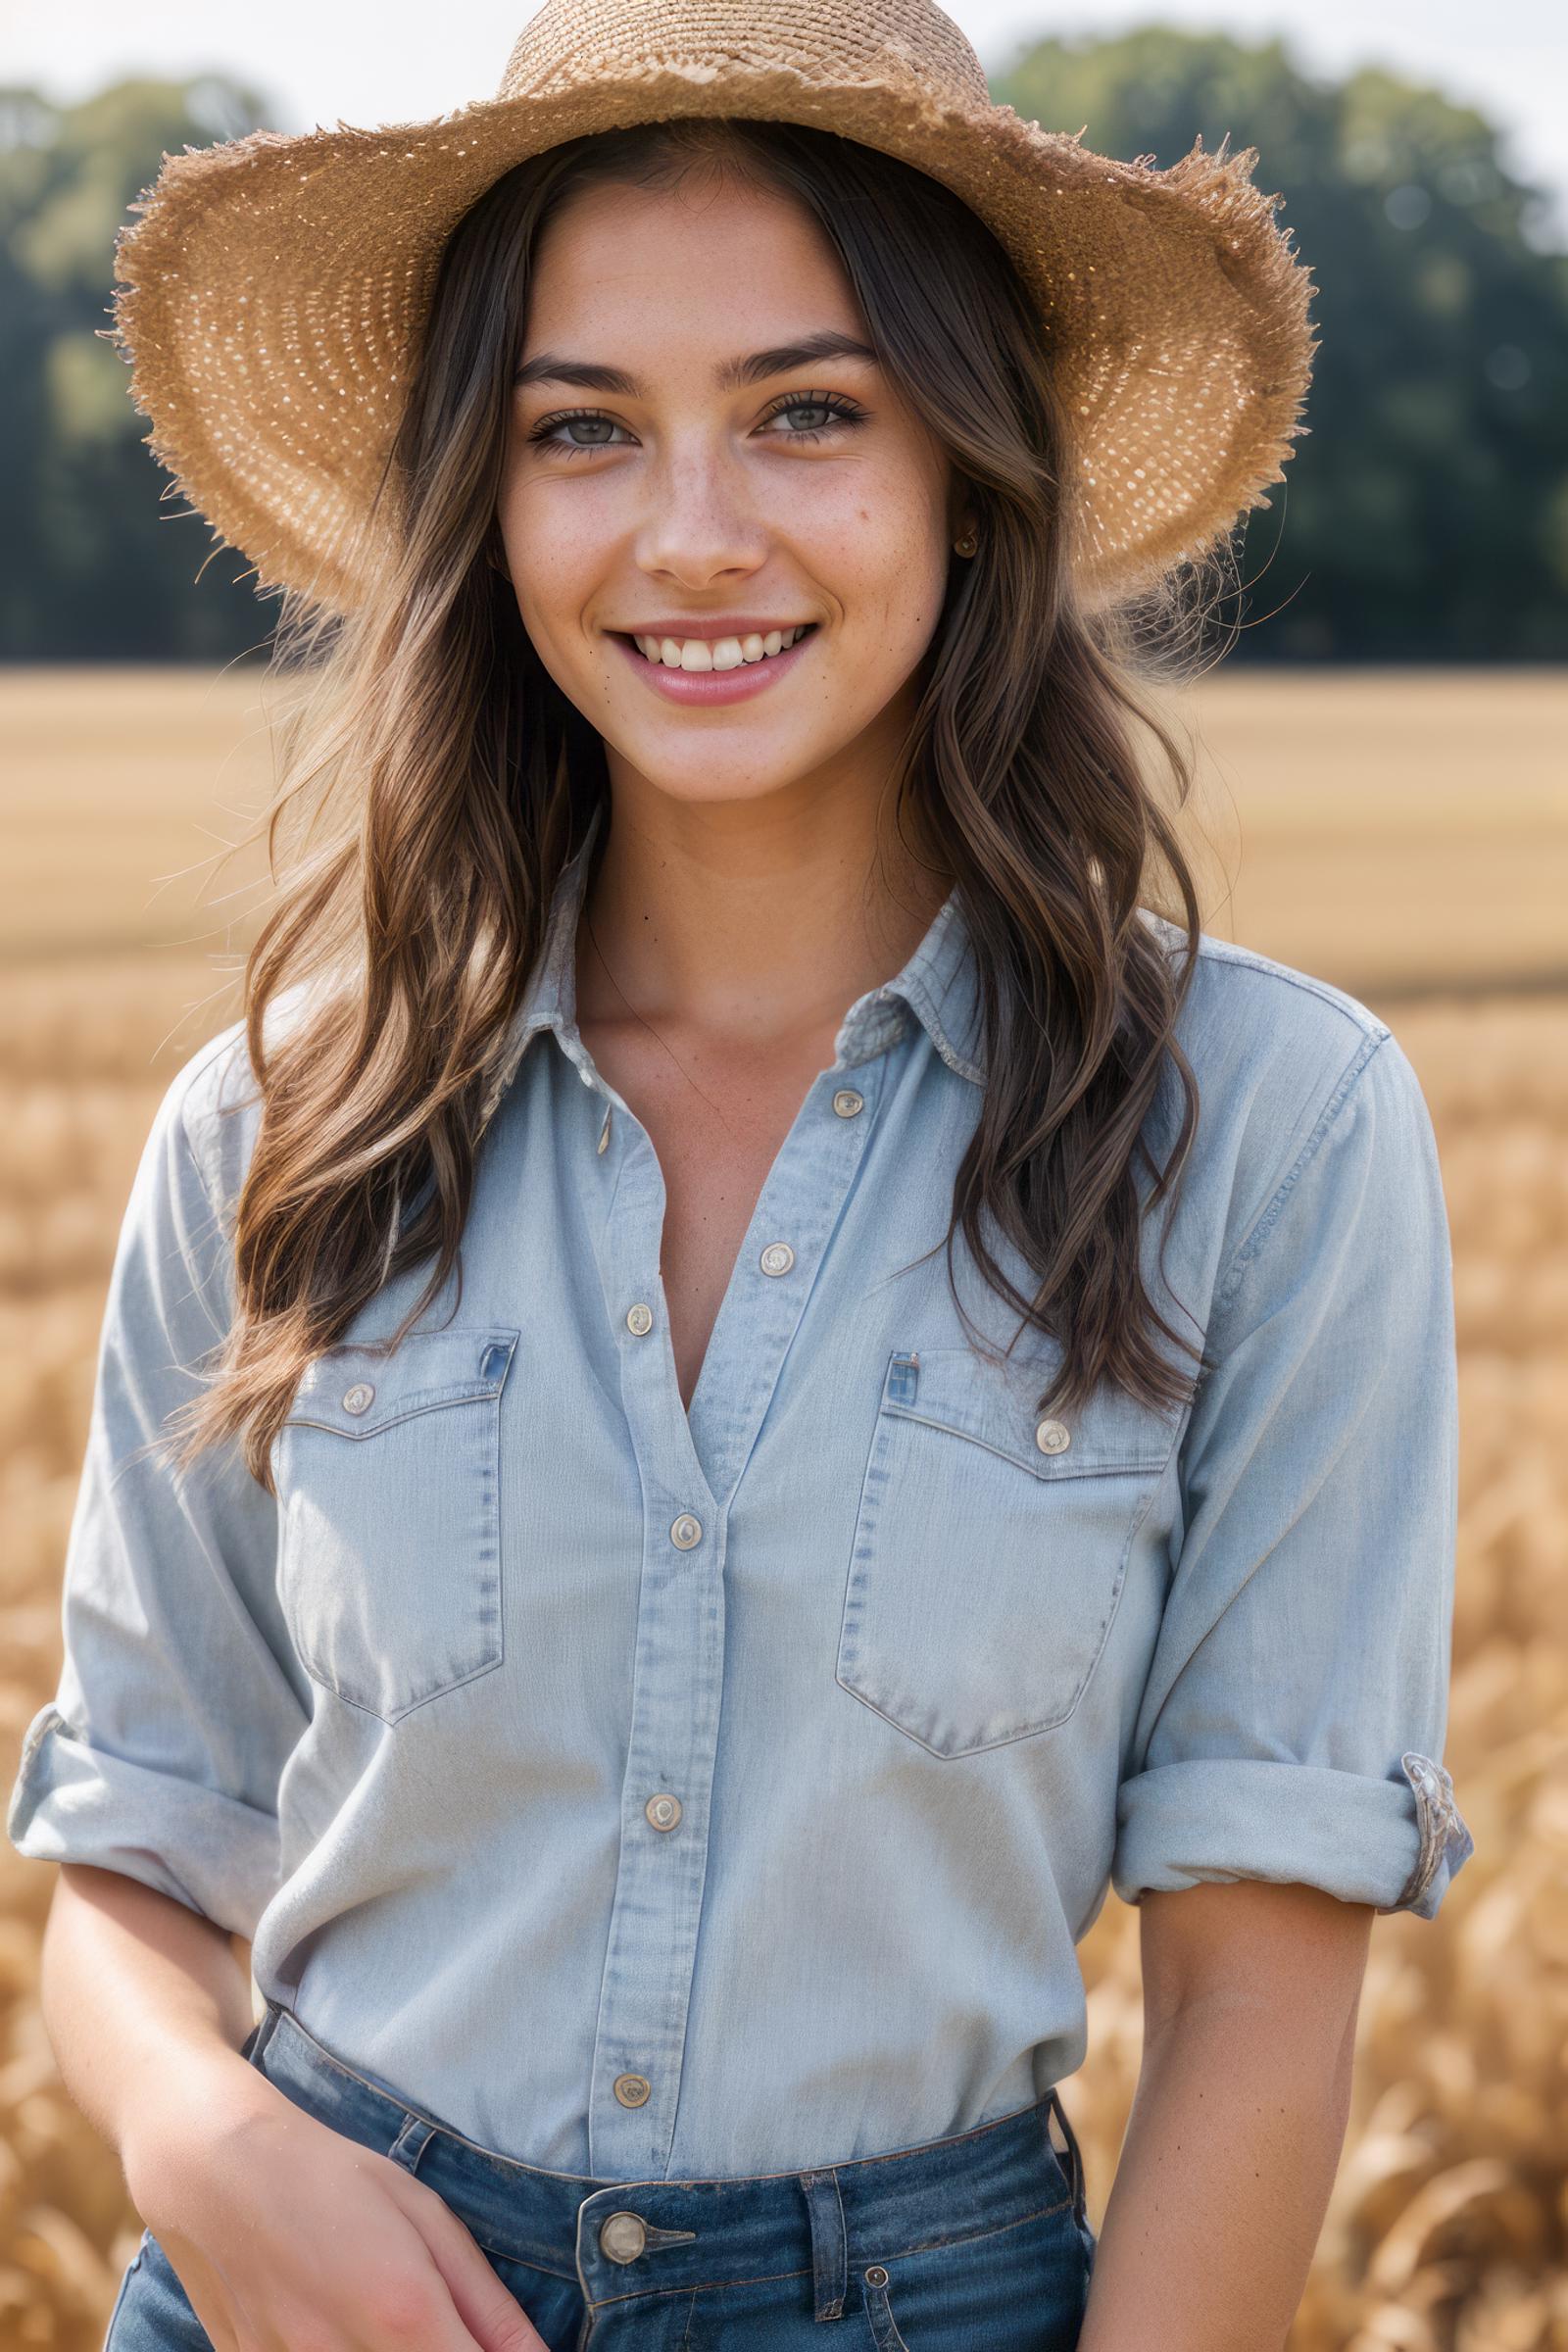 A woman with brown hair wearing a straw hat and a blue shirt smiles for a picture.